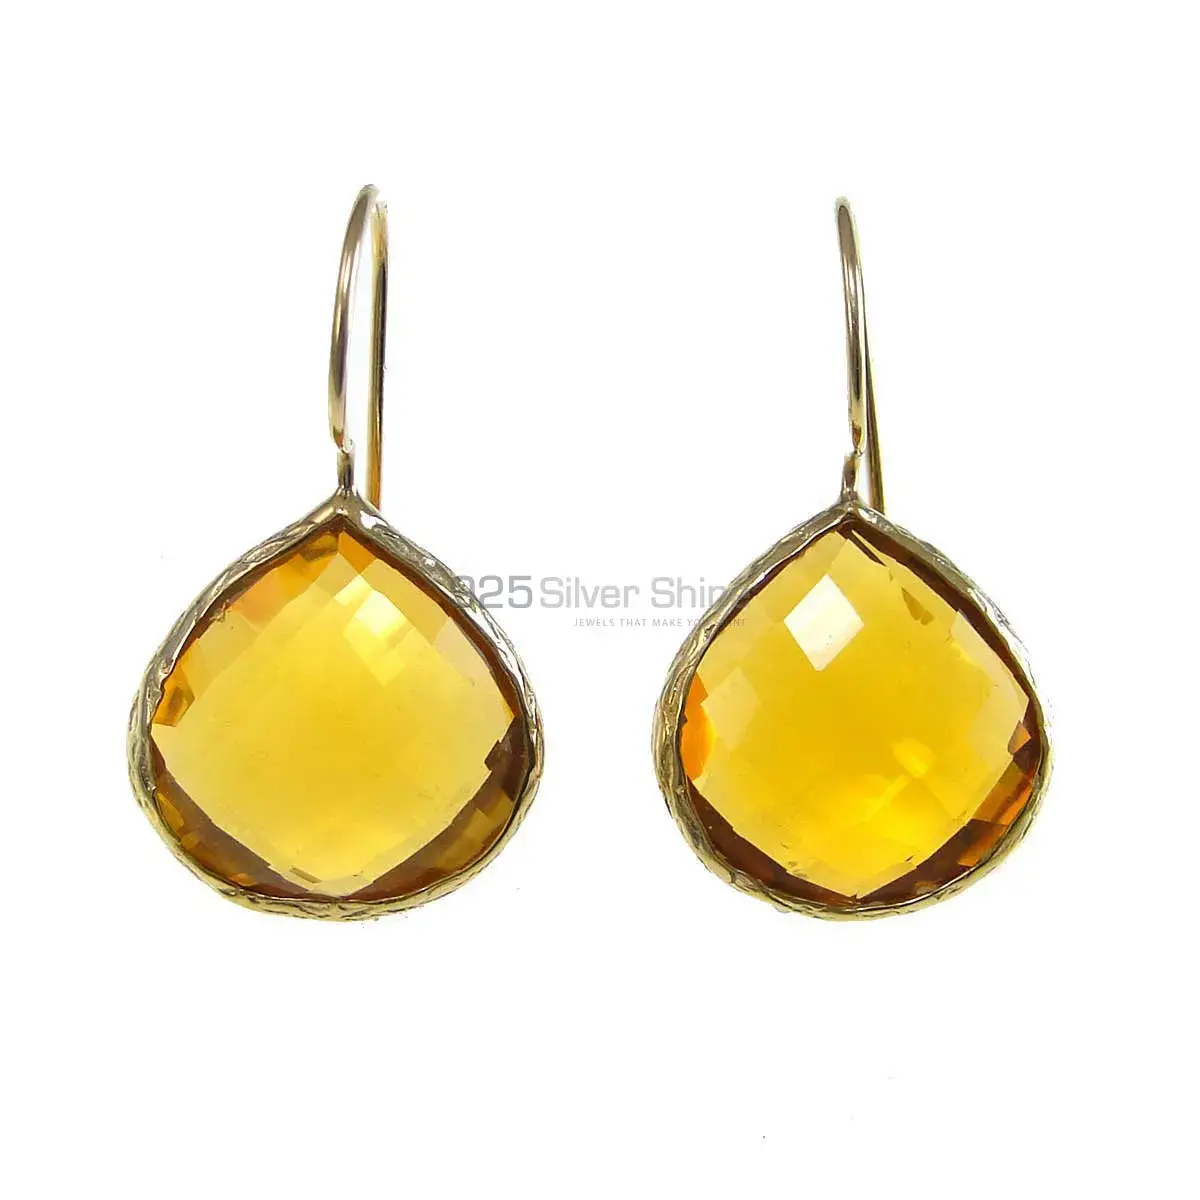 Inexpensive 925 Sterling Silver Handmade Earrings Suppliers In Yellow Quartz Gemstone Jewelry 925SE1984